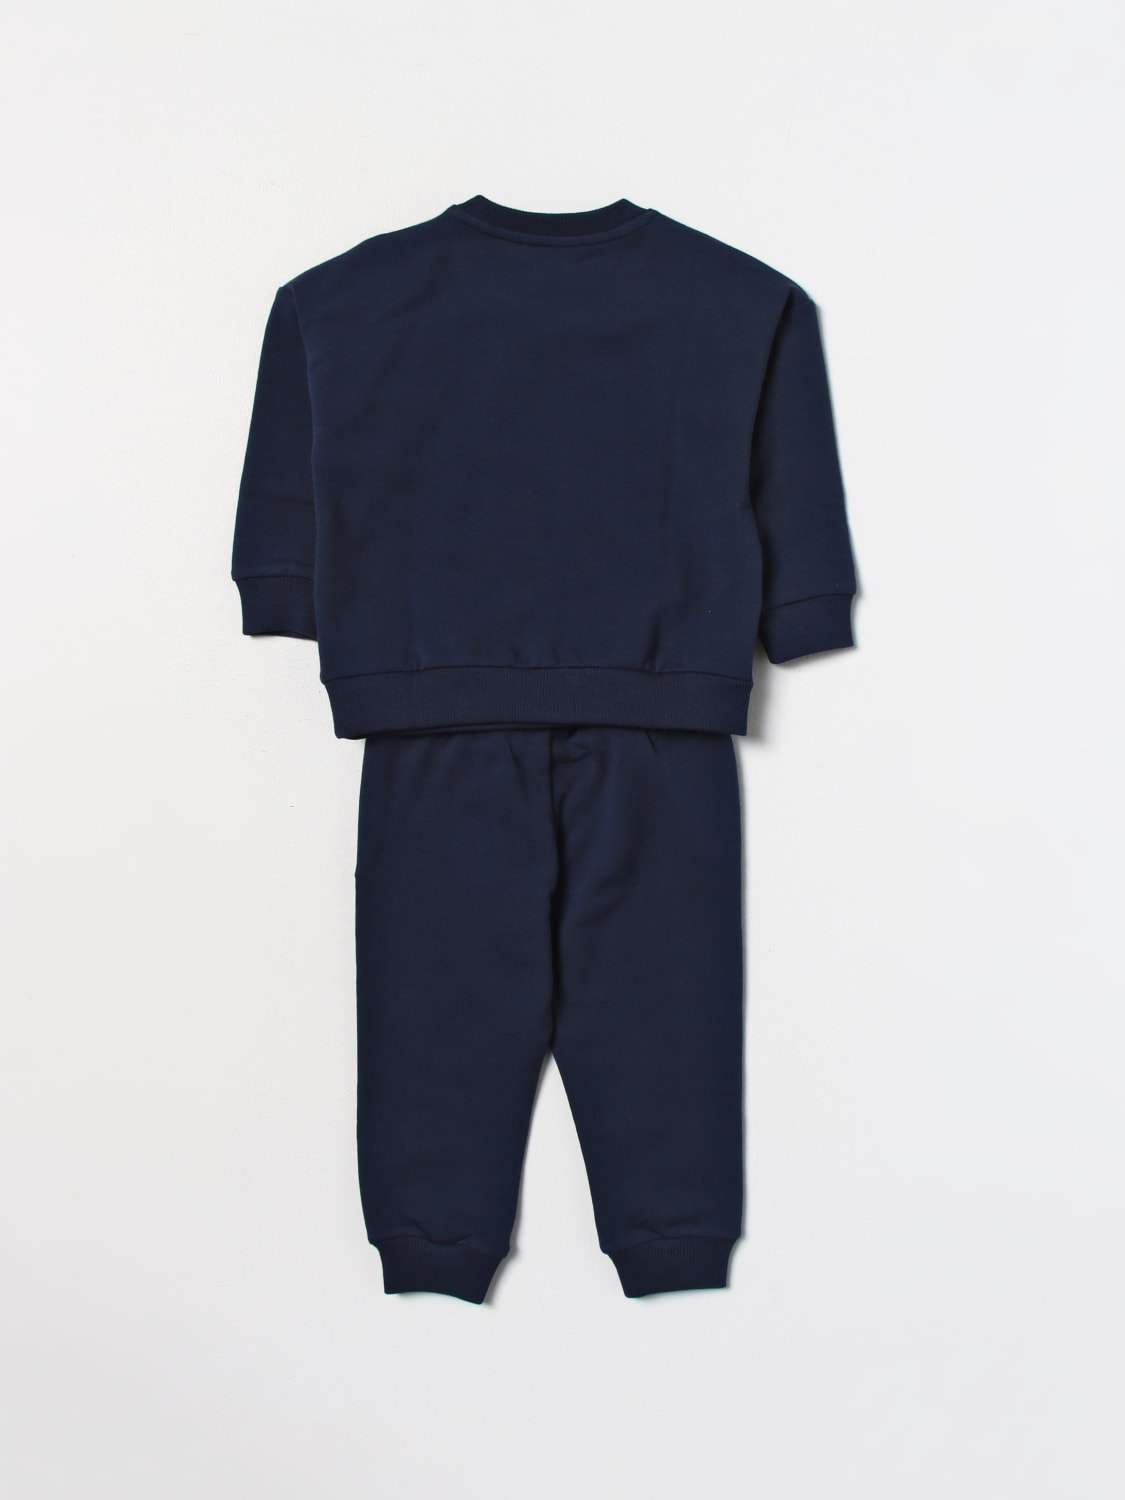 MOSCHINO BABY: outfit in stretch cotton - Blue | Moschino Baby jumpsuit ...